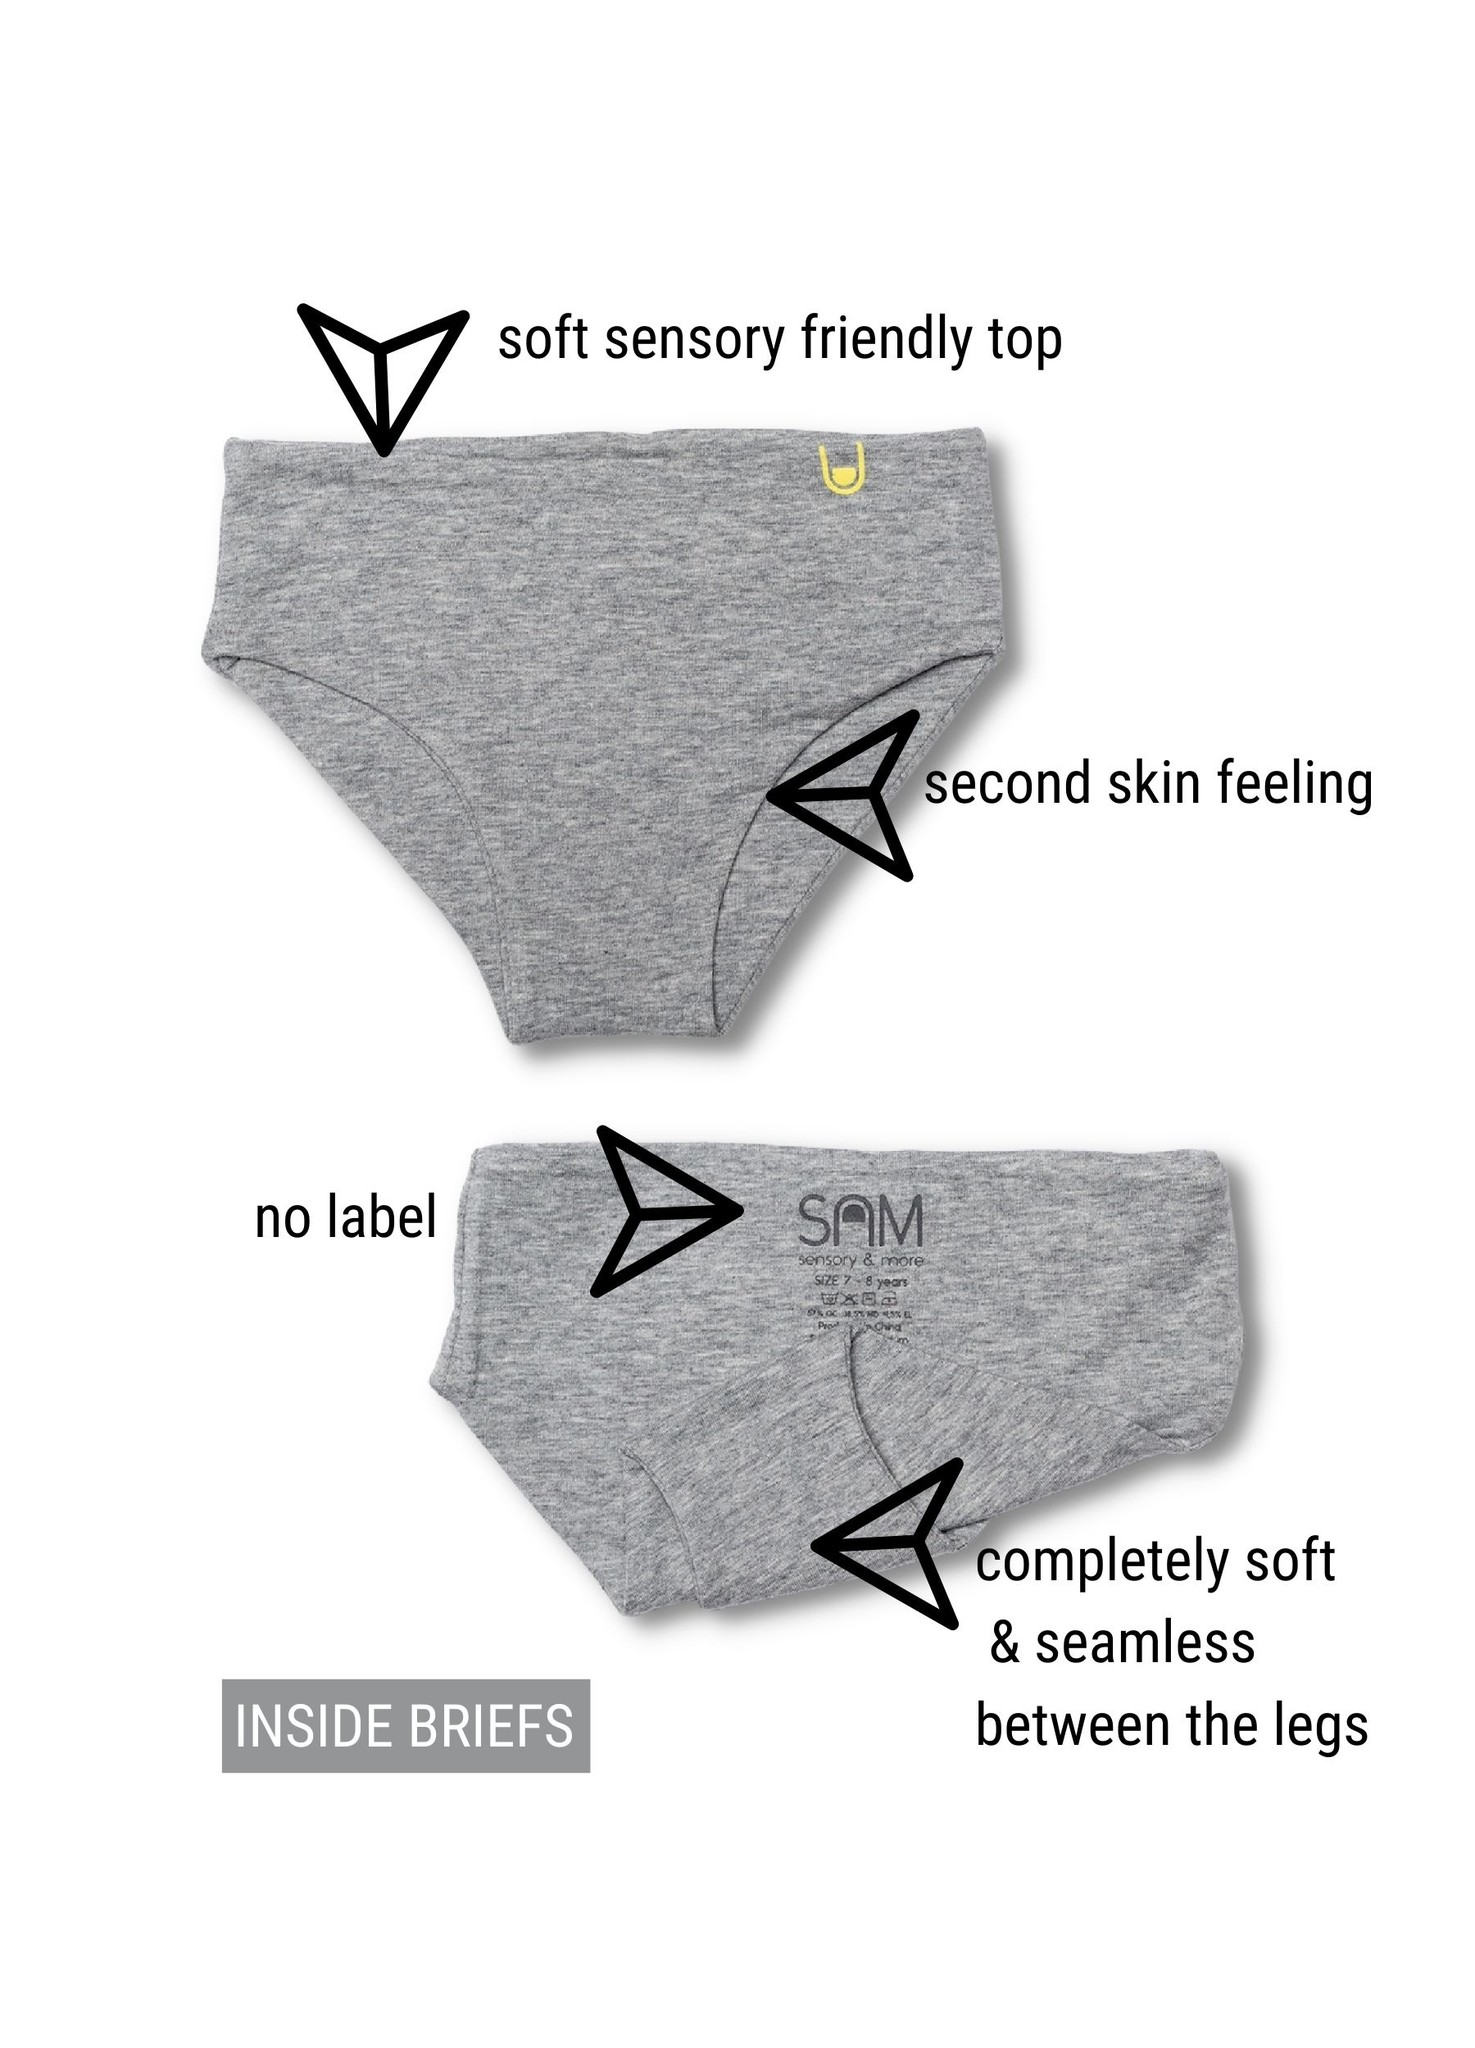 Soft briefs for Women. Seamless, no itchy labels. From organic Cotton. -  SAM, Sensory & More